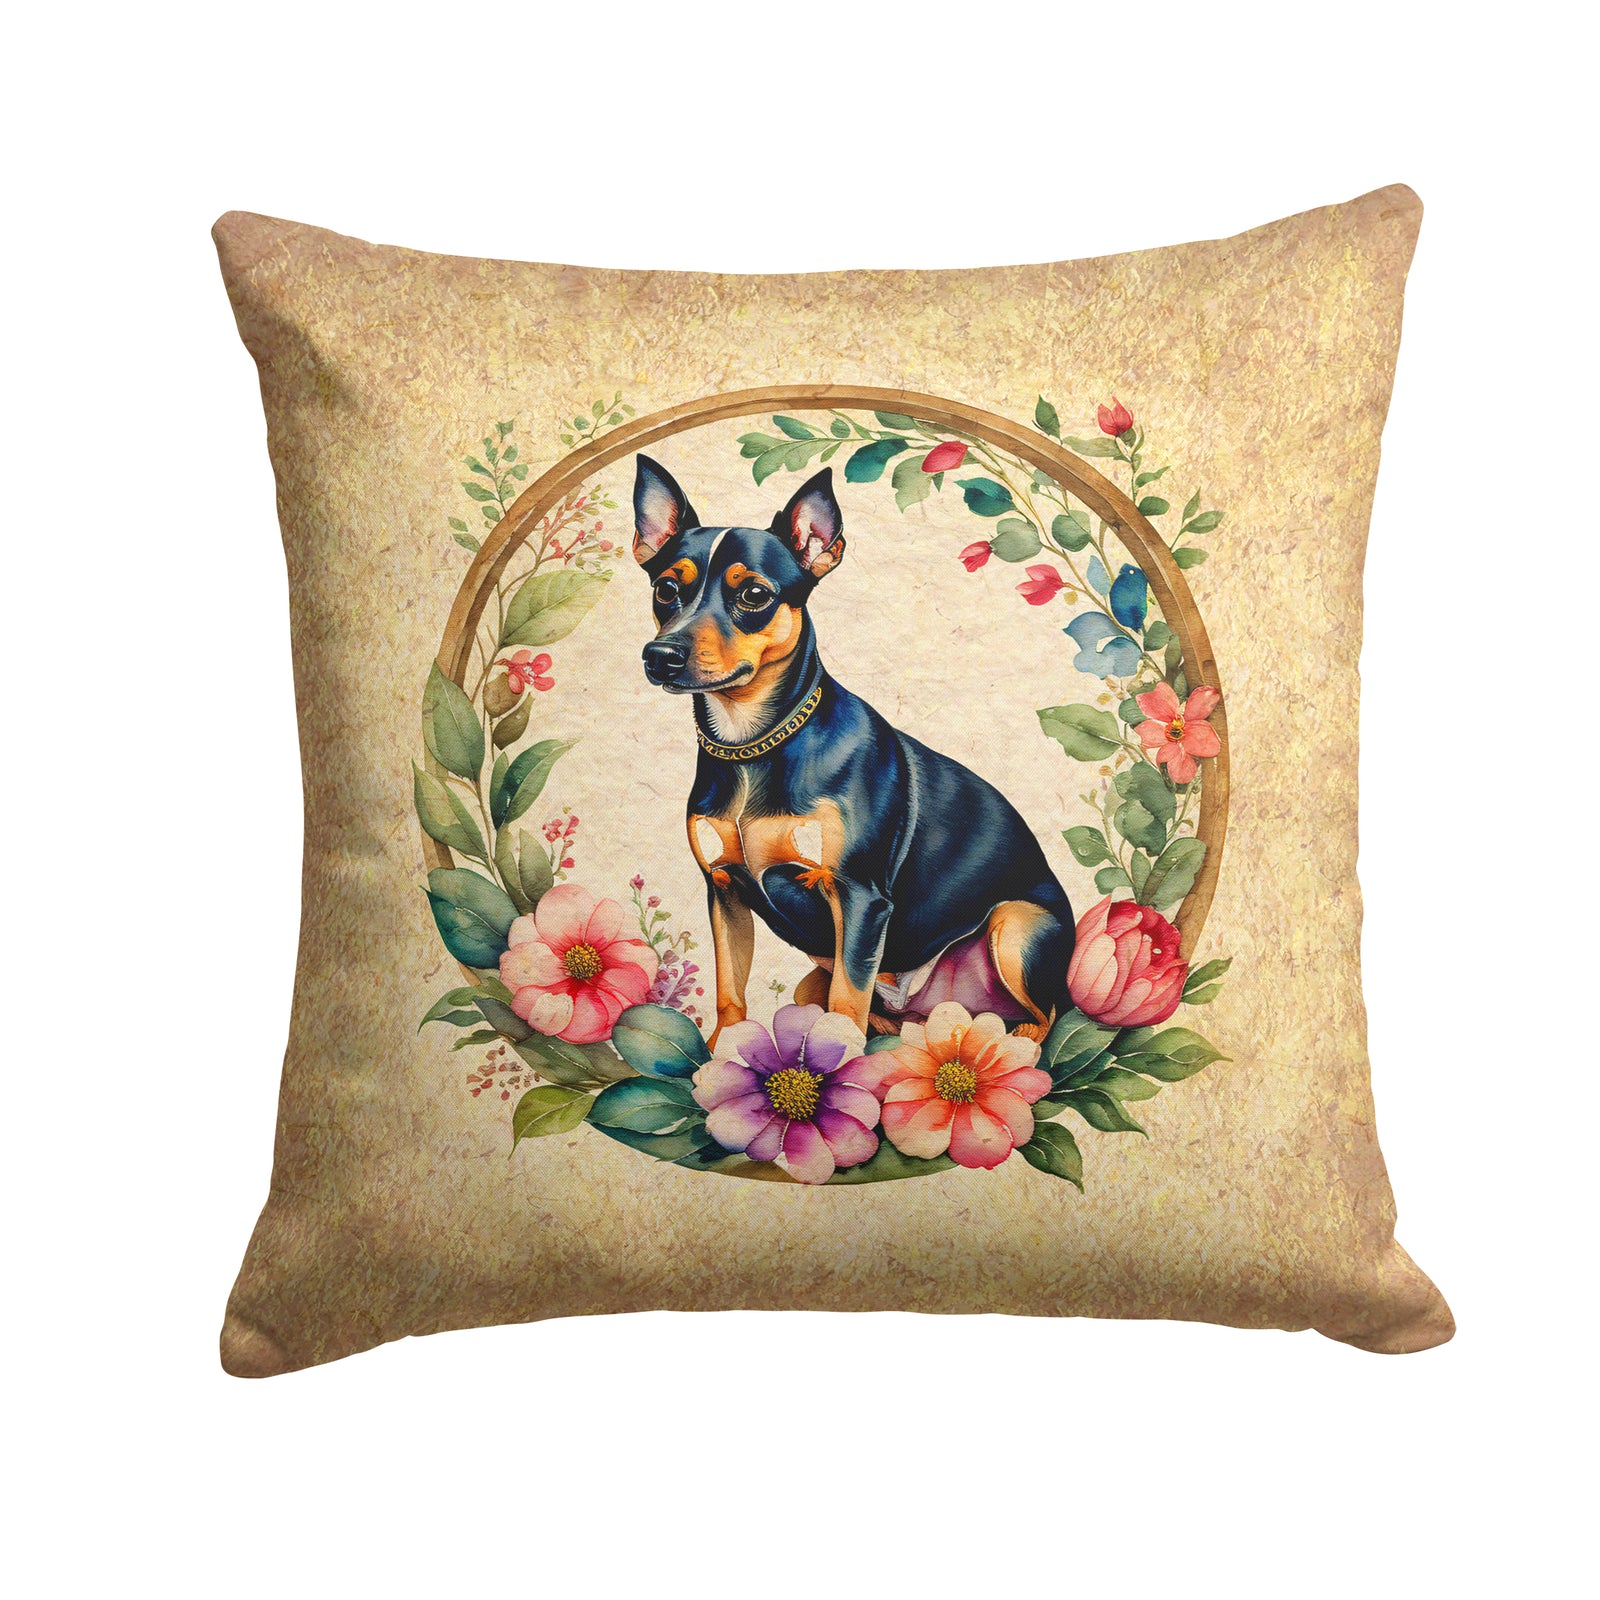 Buy this Miniature Pinscher and Flowers Fabric Decorative Pillow